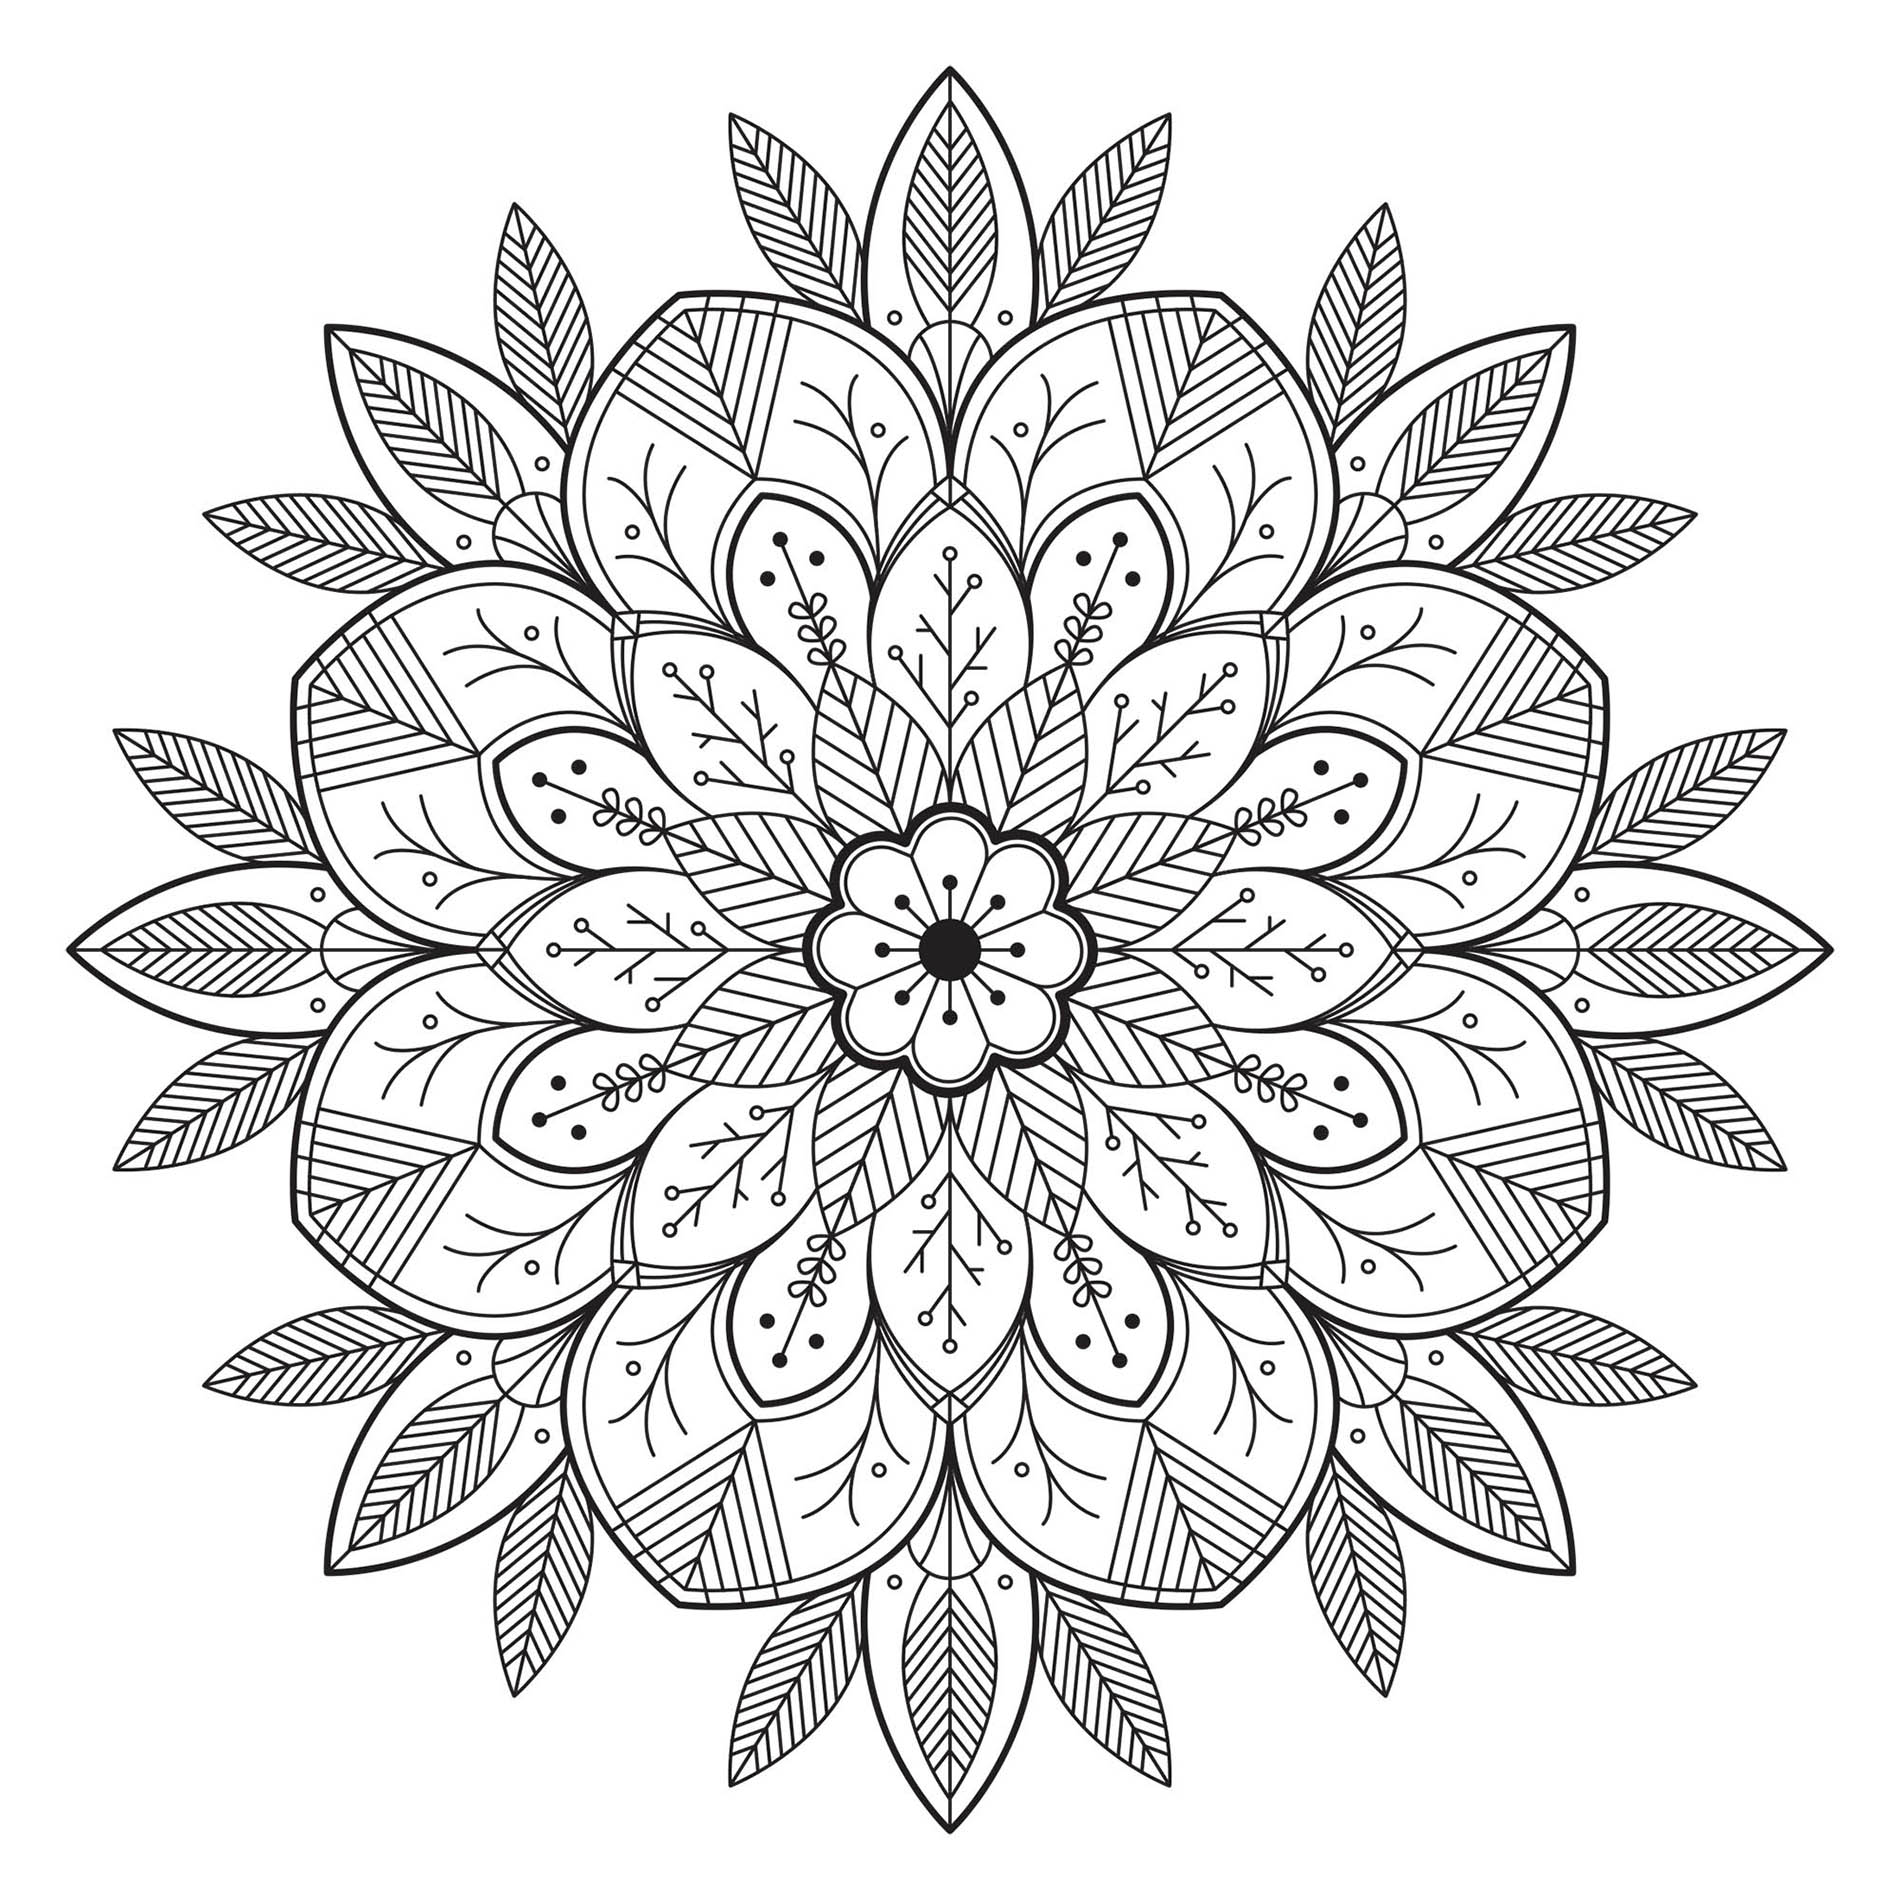 Mandala with leaves and flowers - Mandalas Kids Coloring Pages